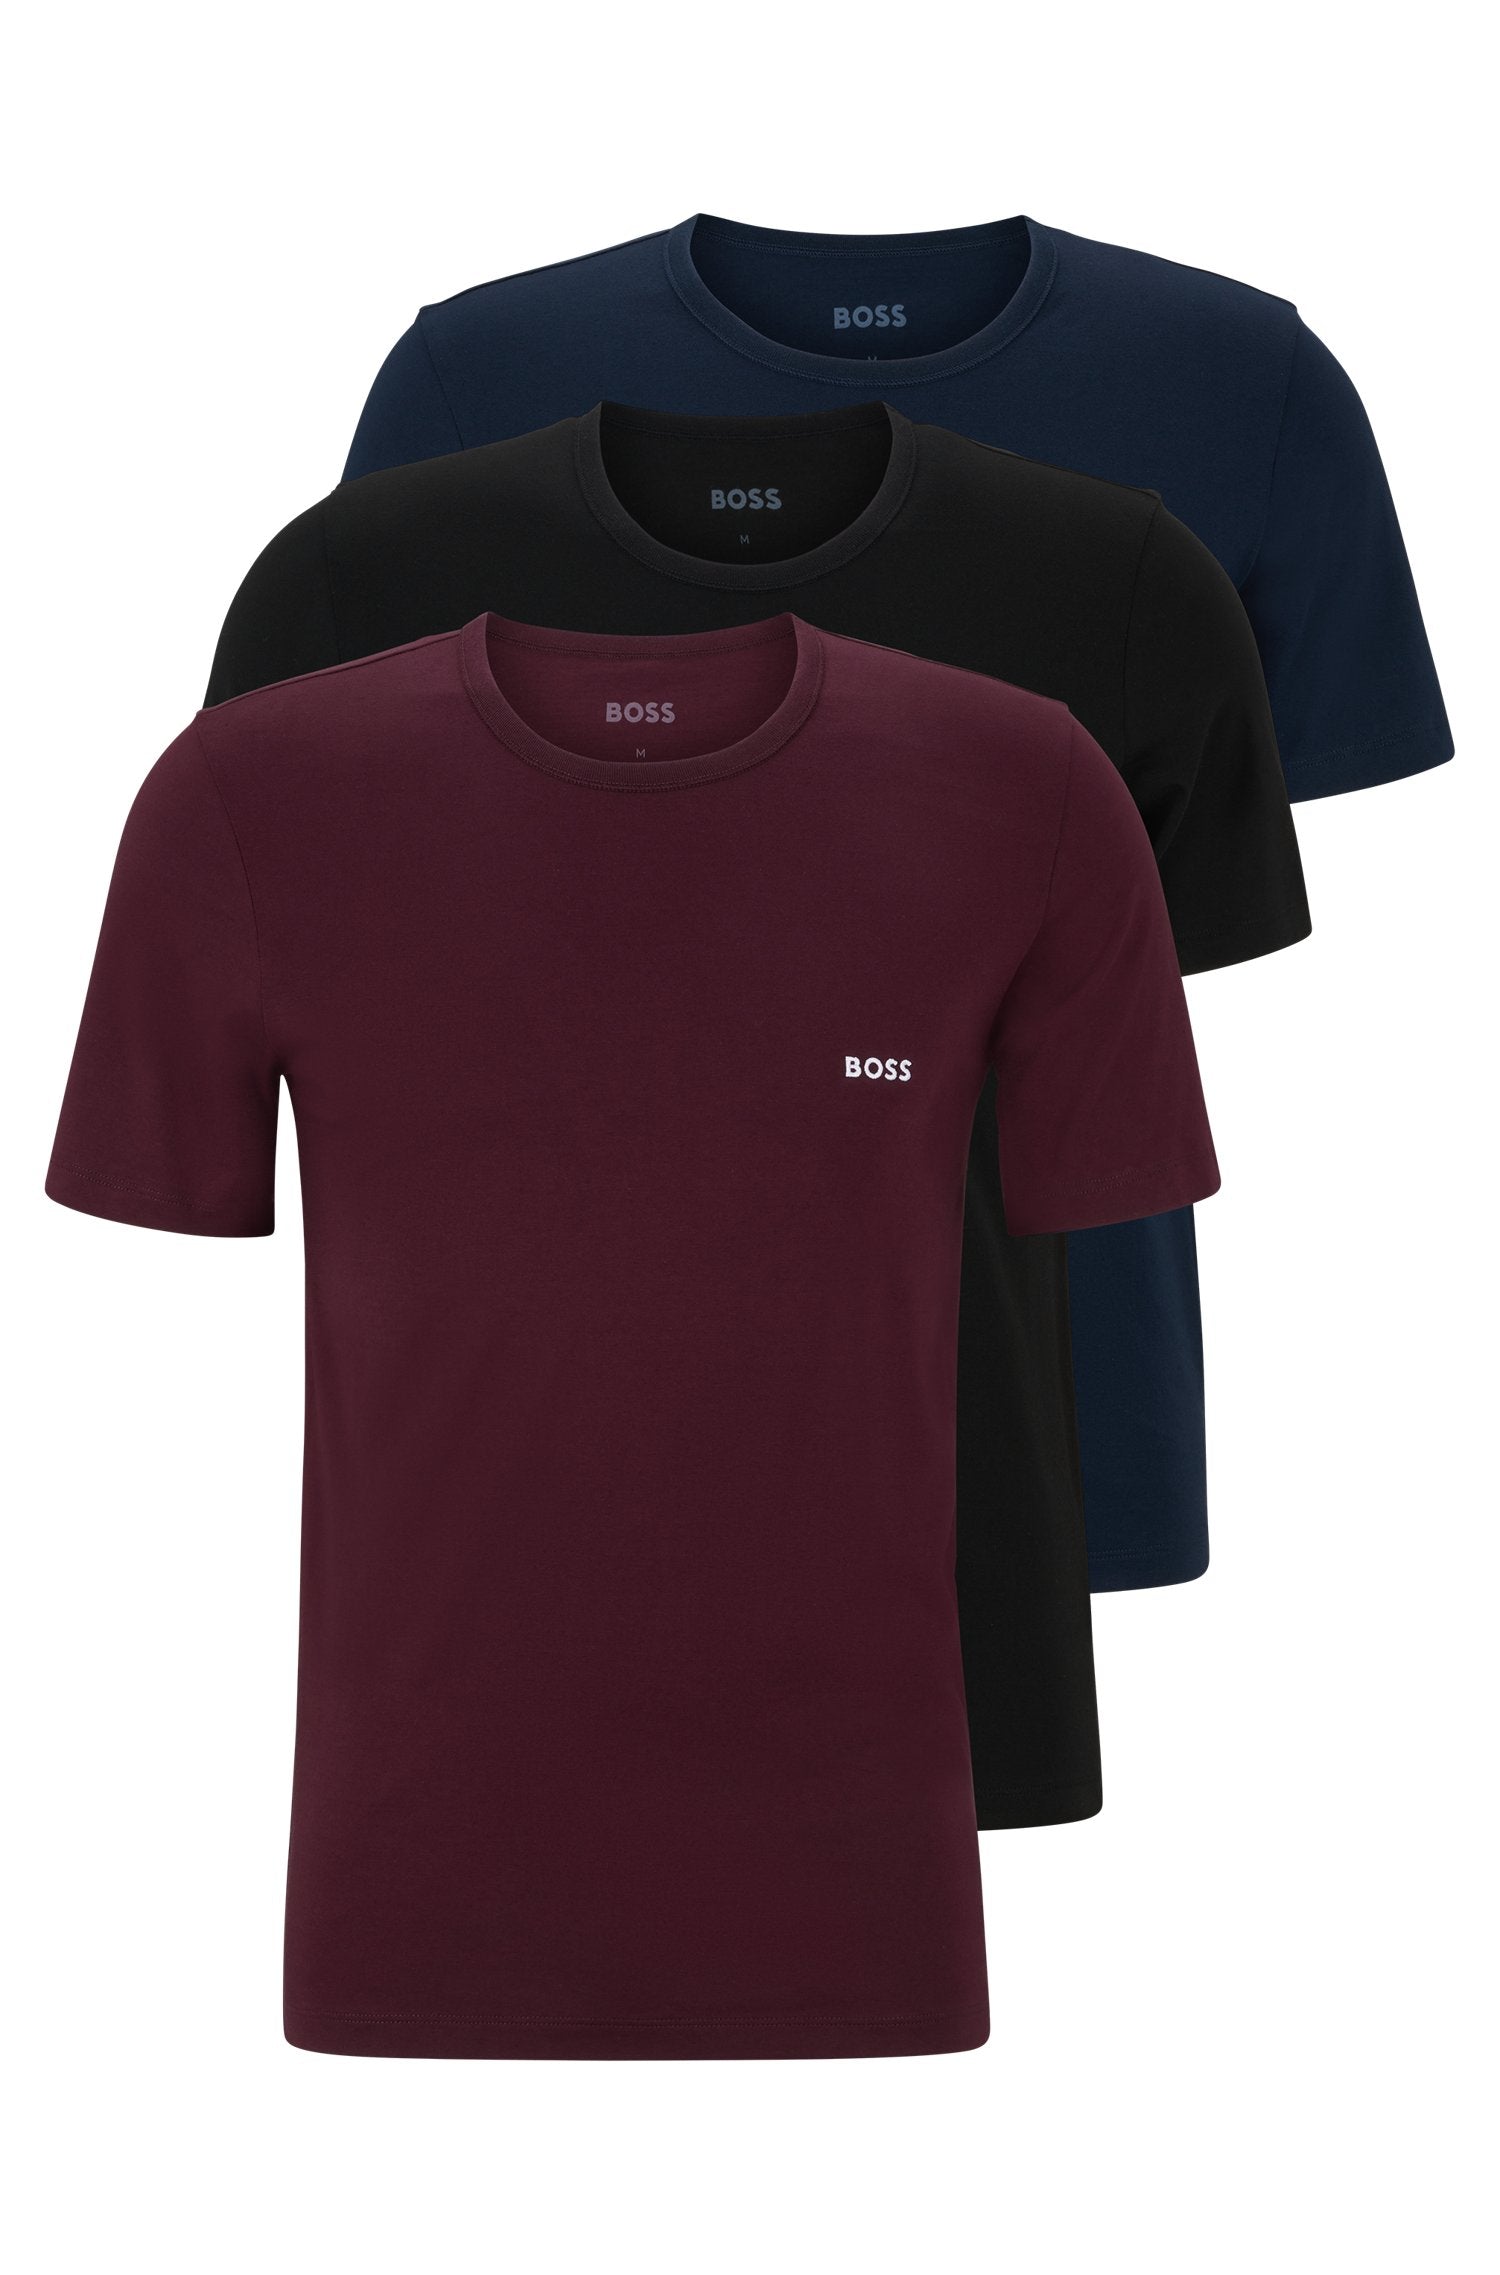 BOSS - 3-Pack Of T-Shirts In Jersey Cotton In Black, Navy and Dark Red 50475286 973